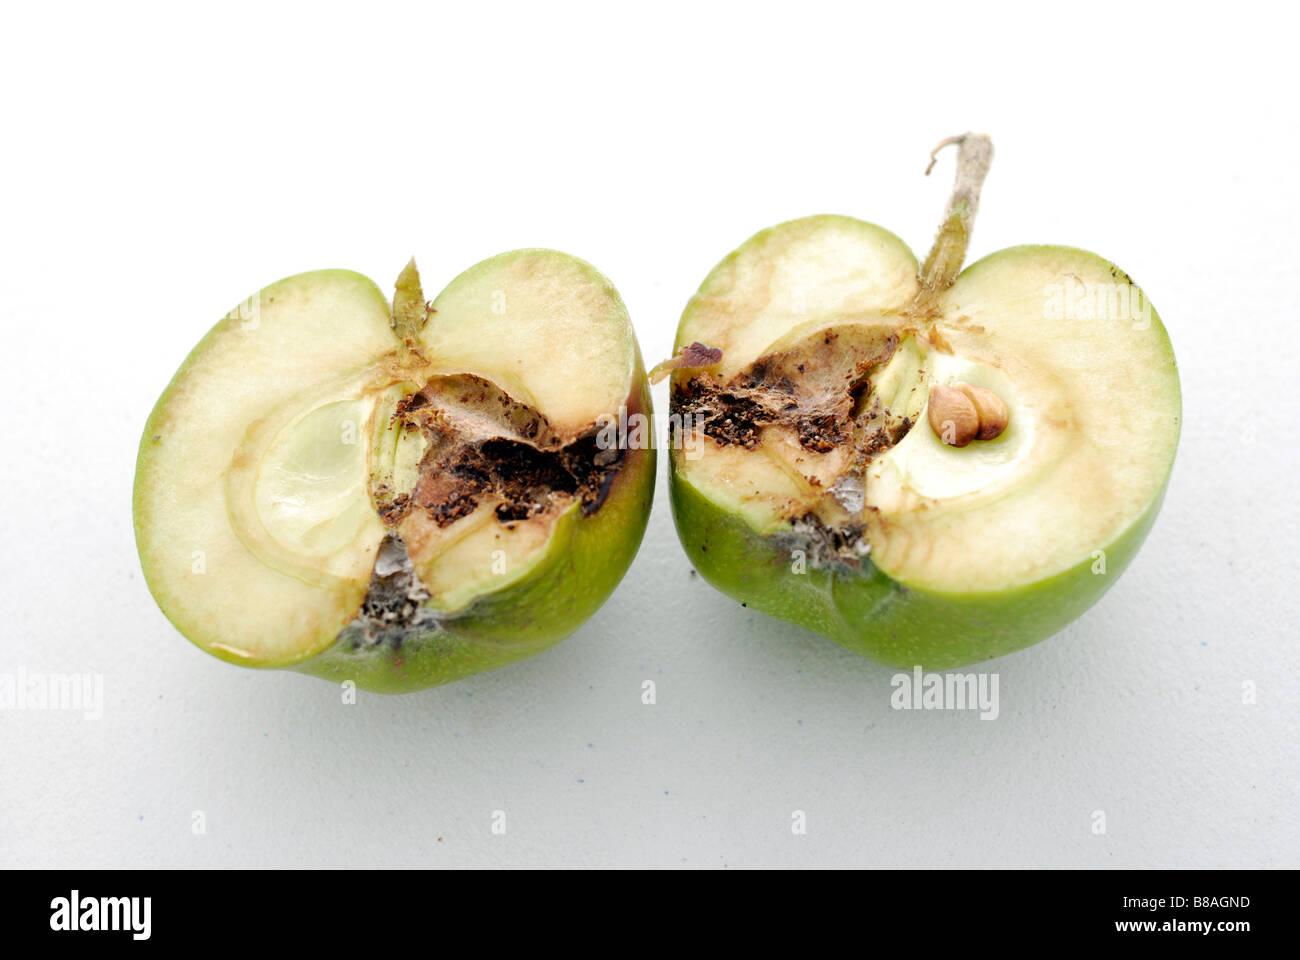 Codling moth damage shown in cross section of an affected apple Stock Photo